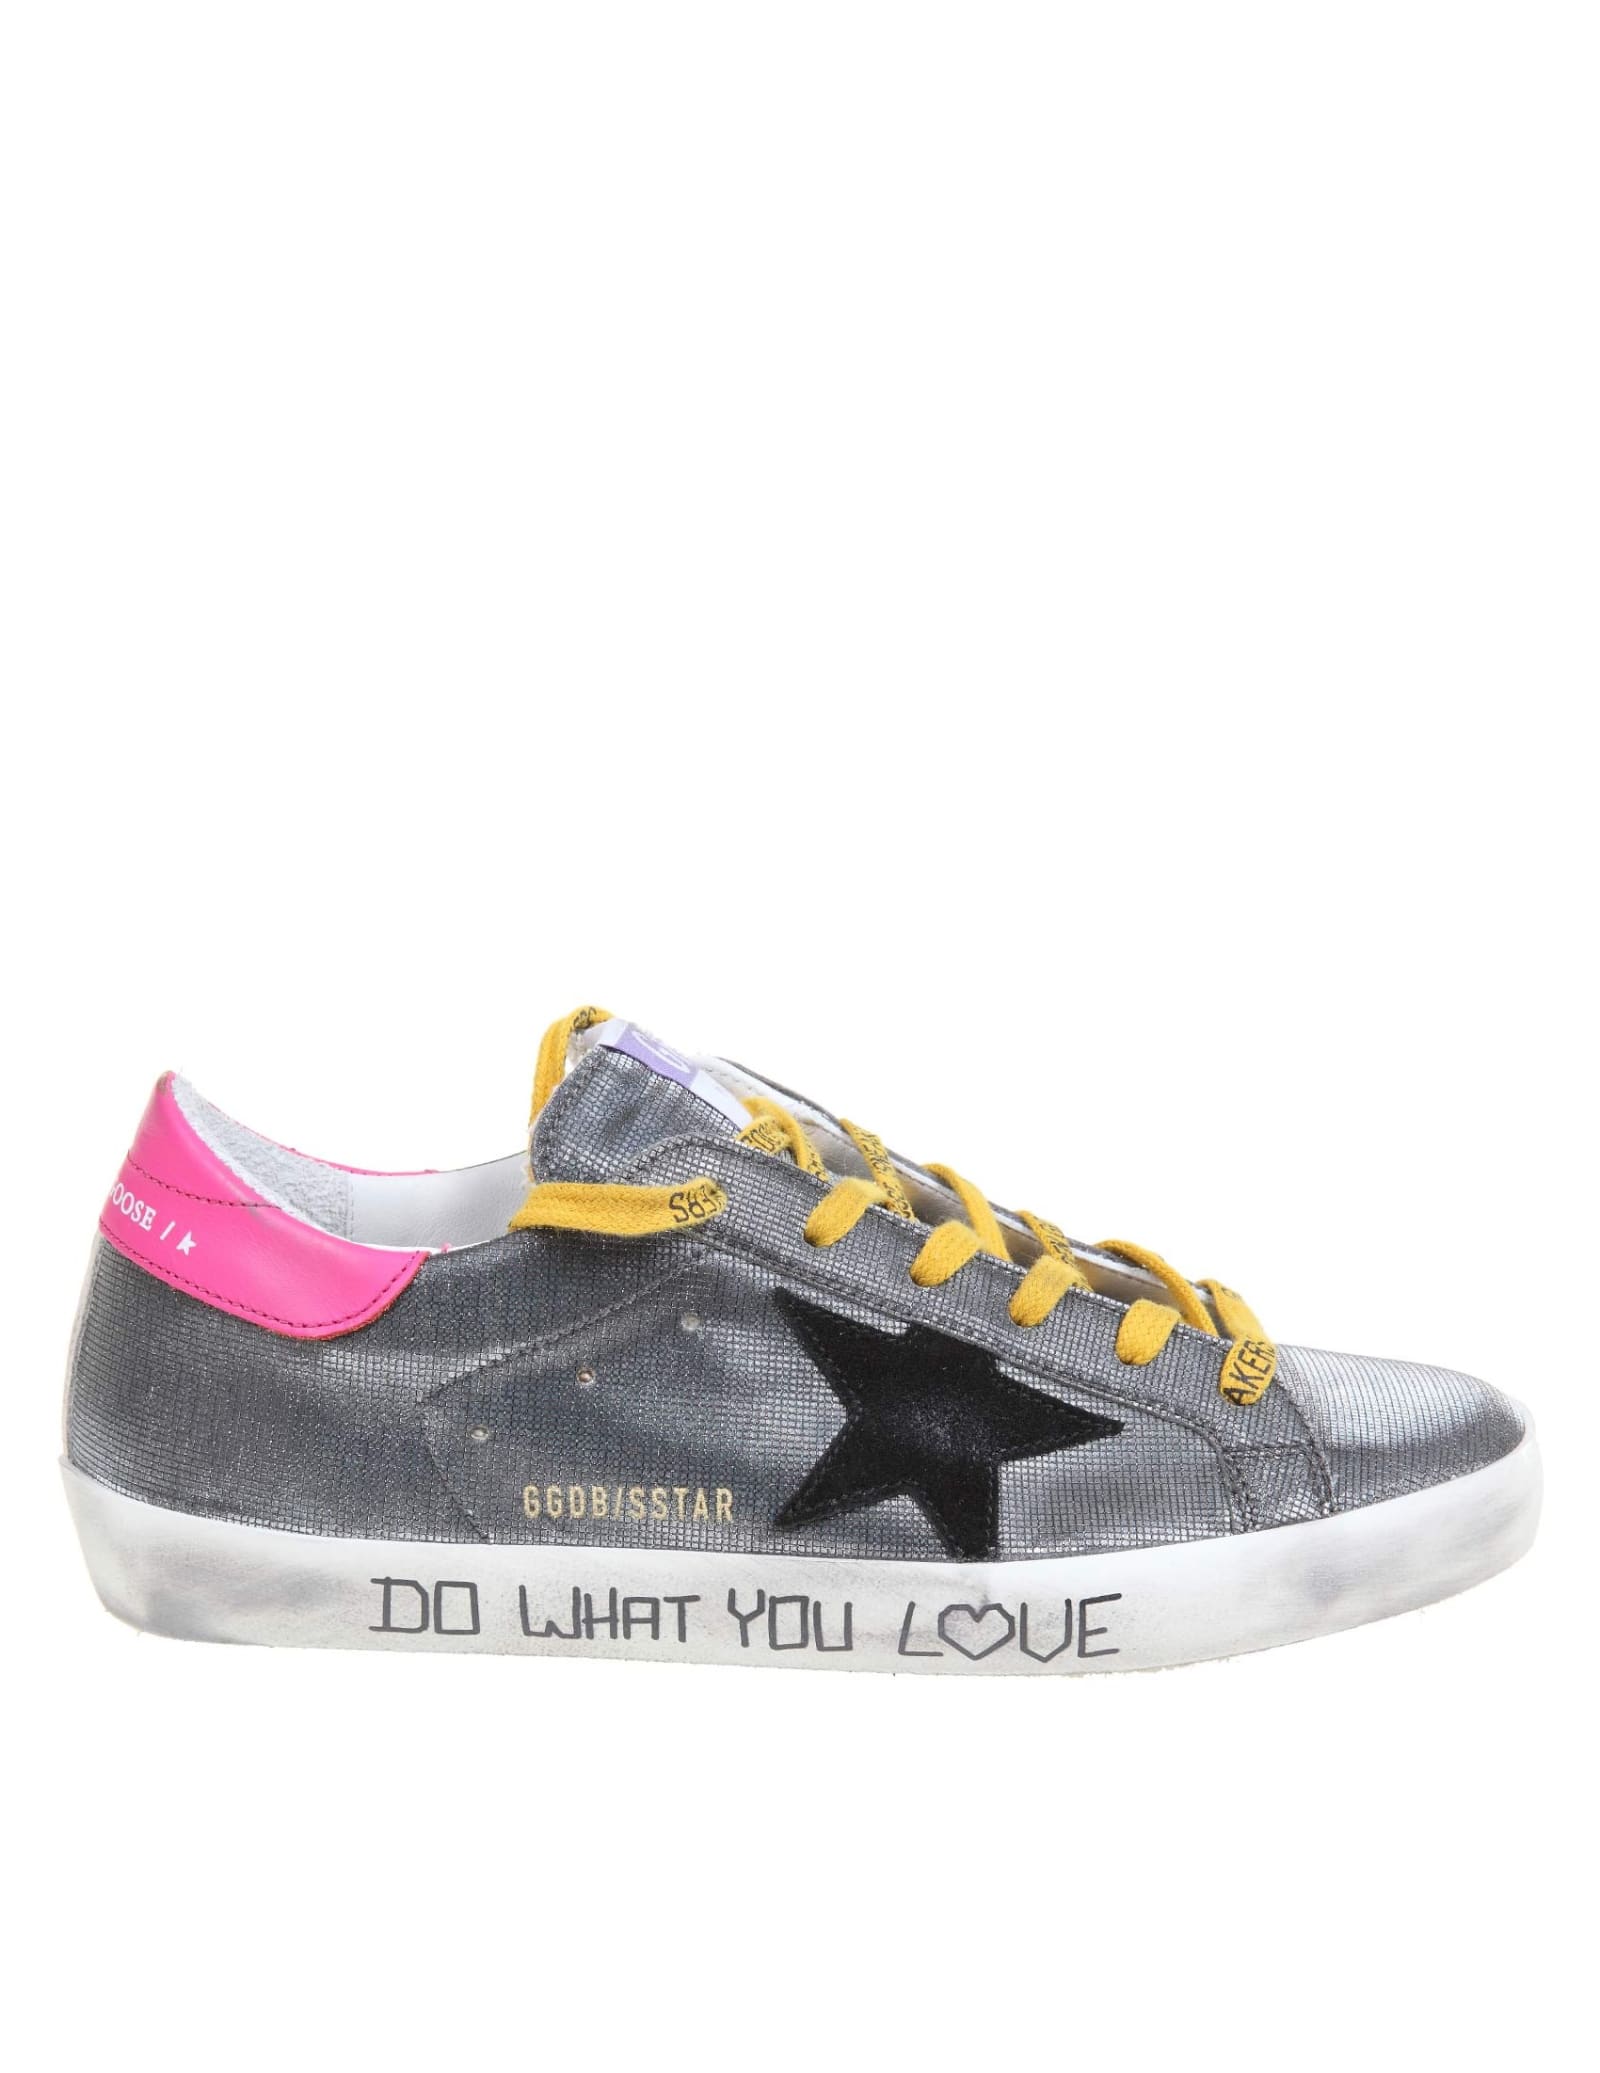 Buy Golden Goose Super Star Sneakers In Laminated Fabric online, shop Golden Goose shoes with free shipping